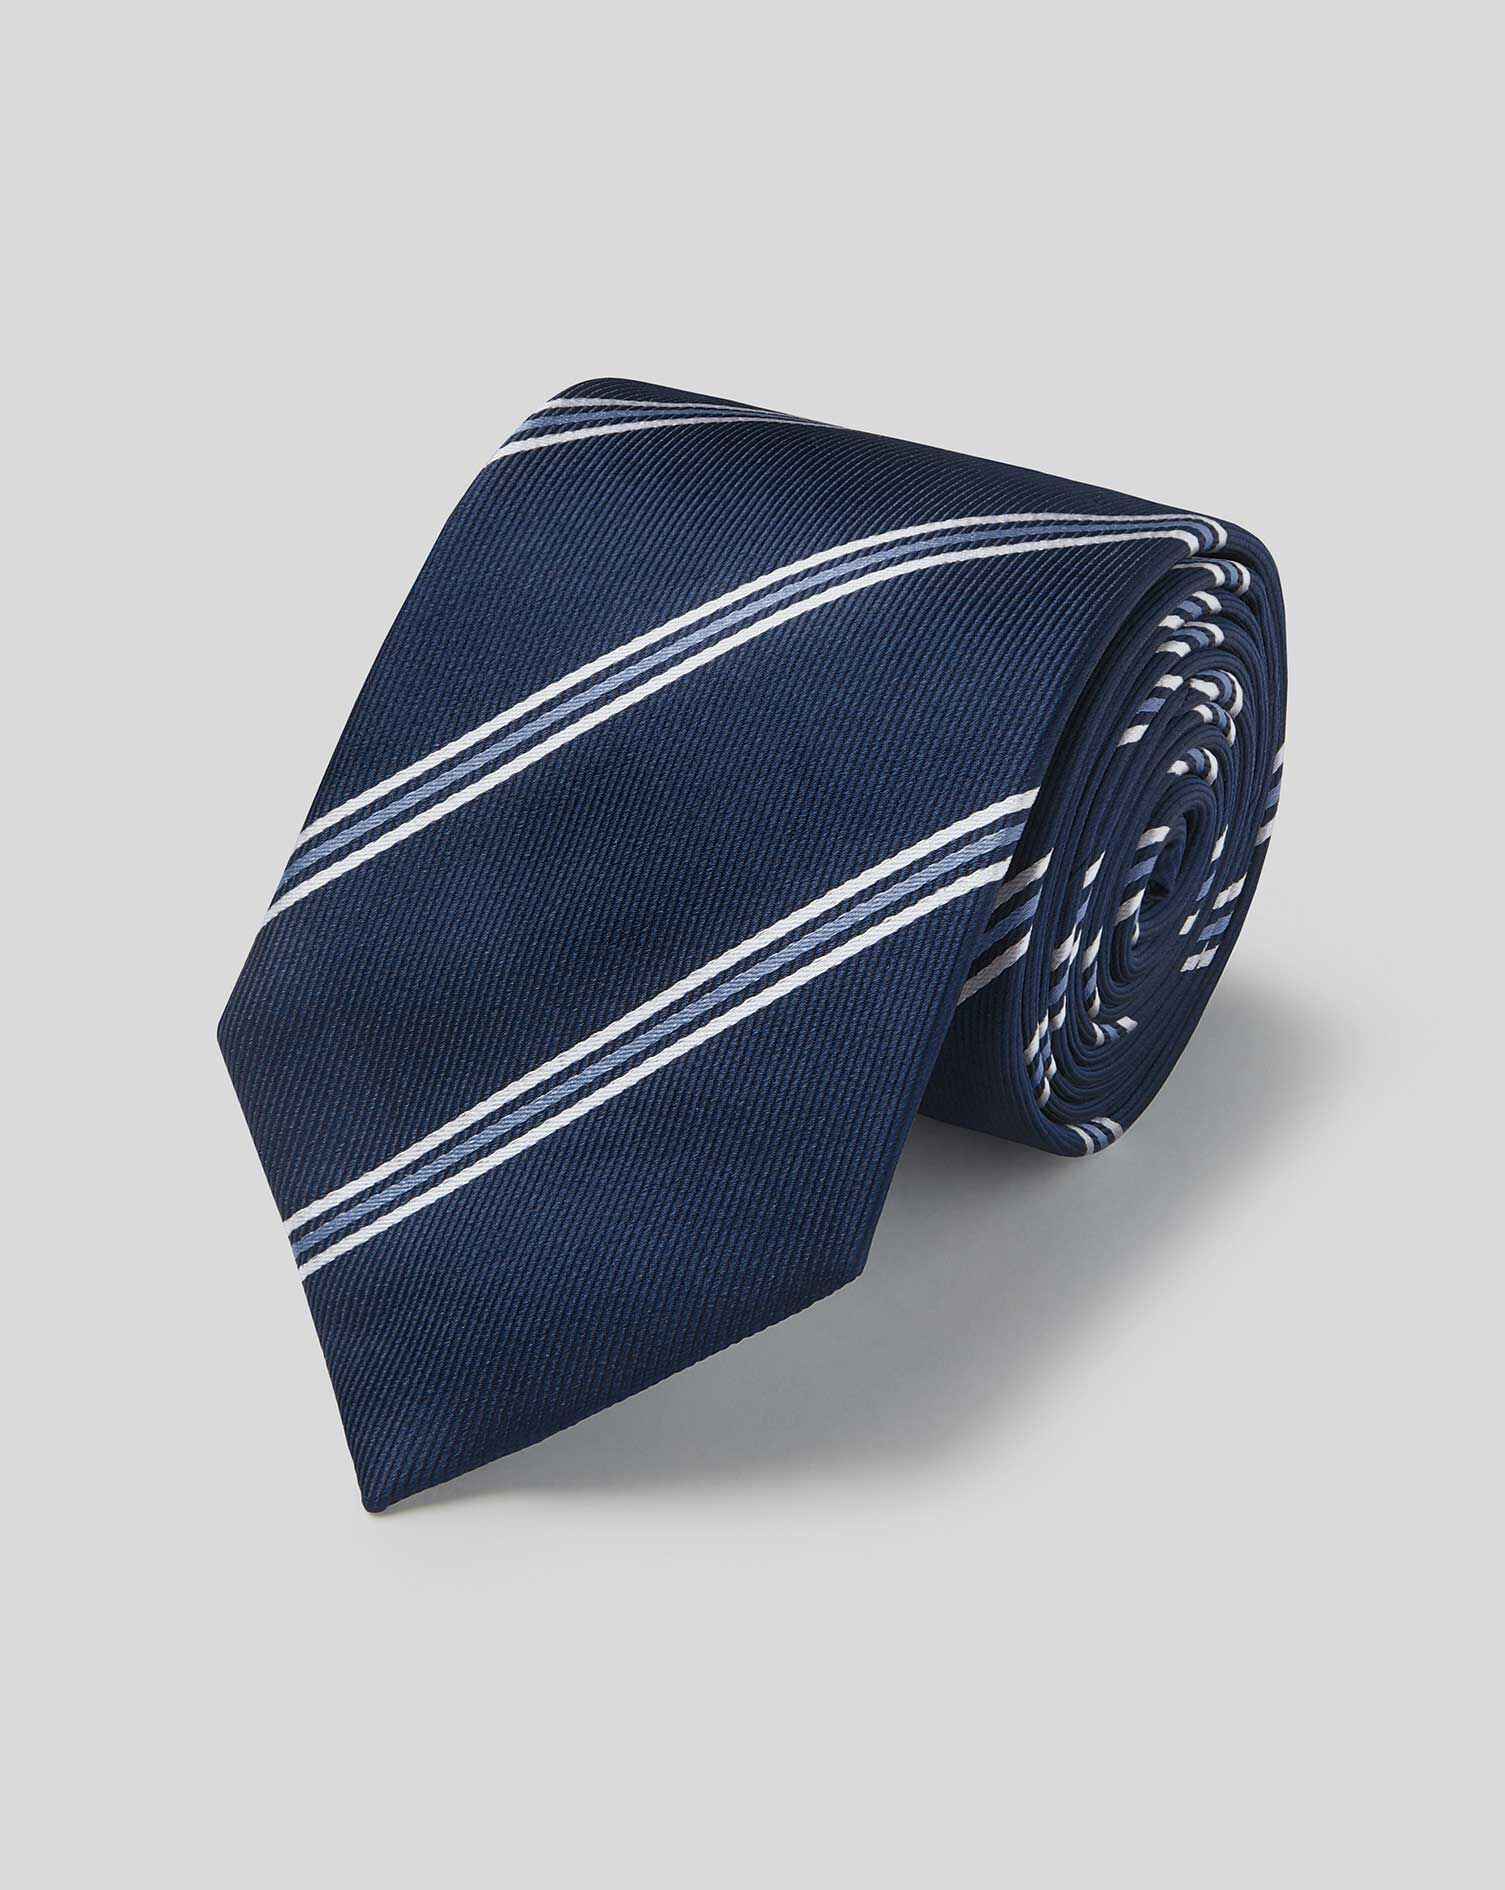 Black with Textured Blue Stripes Mens Tie